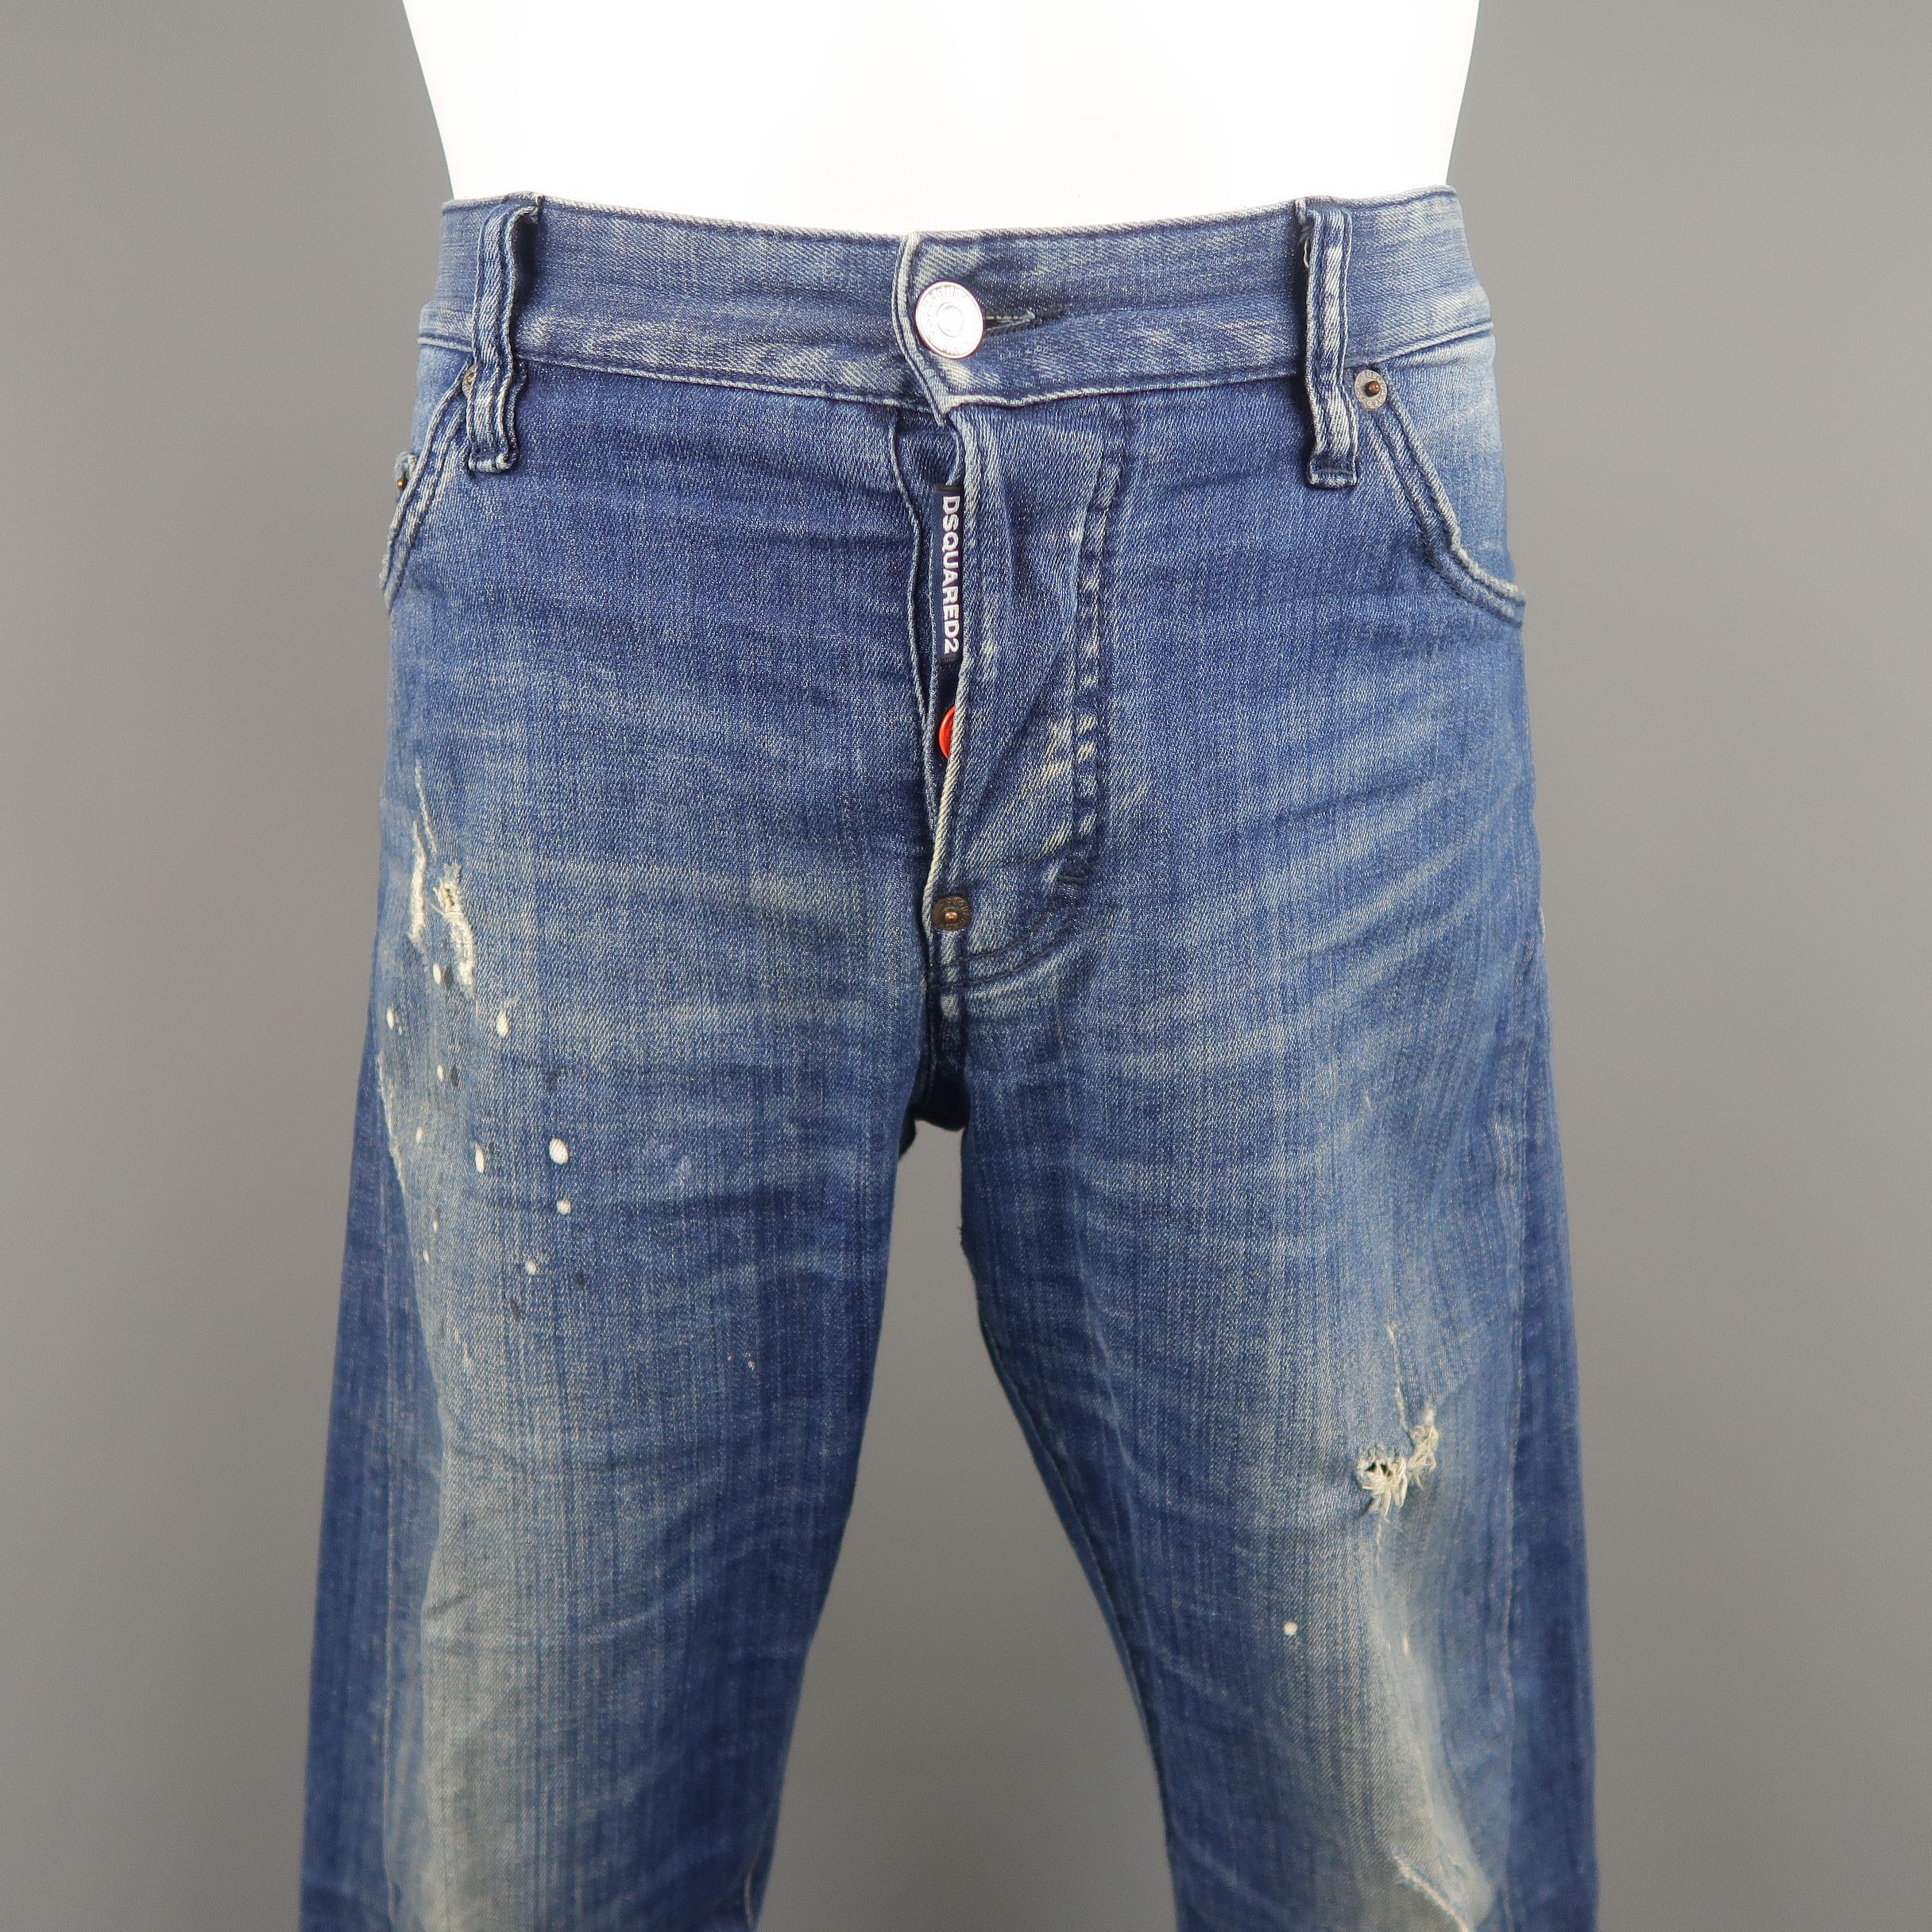 DSQUARED slim fit jeans come in medium dirty wash distressed denim with paint splatter details. Made in Italy.
 
Good Pre-Owned Condition.
Marked: IT 50
 
Measurements:
 
Waist: 36 in.
Rise: 9.5 in.
Inseam: 31 in.